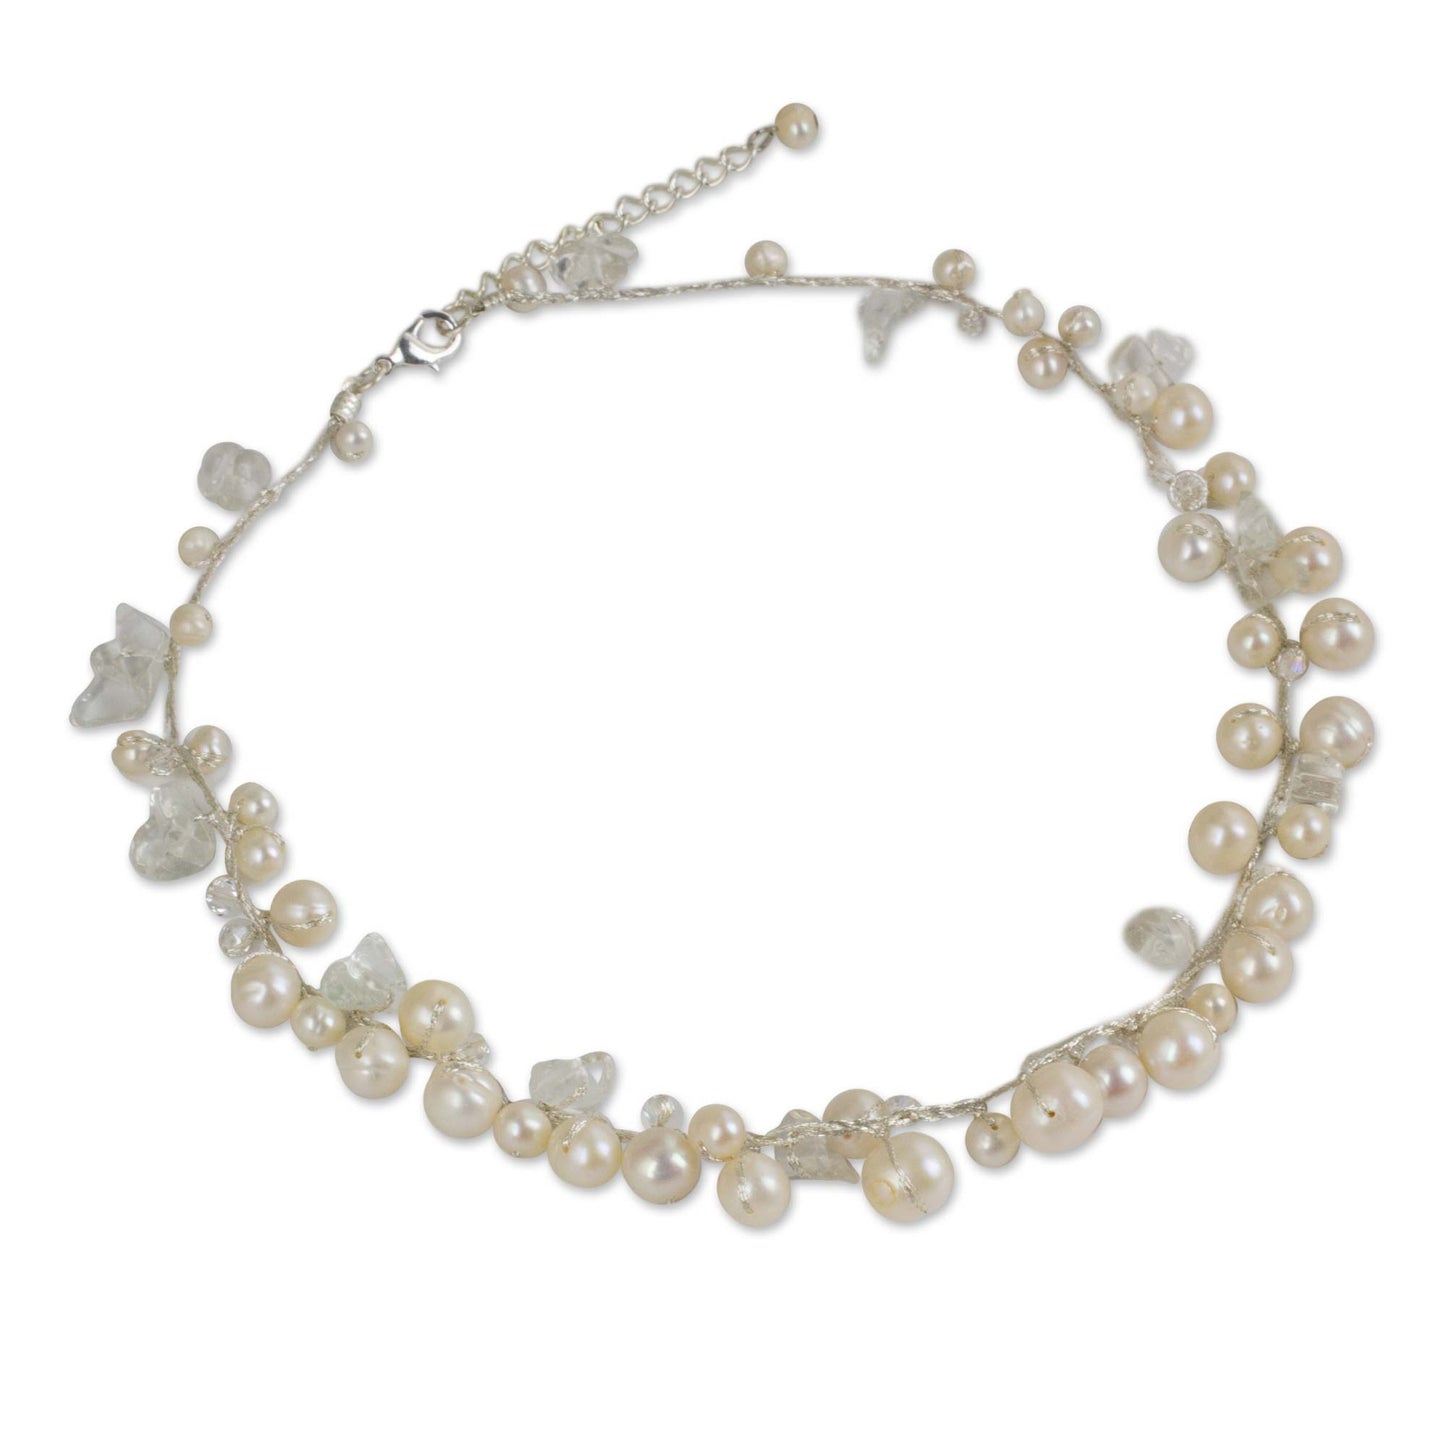 River of Snow Freshwater Pearl Strand Necklace